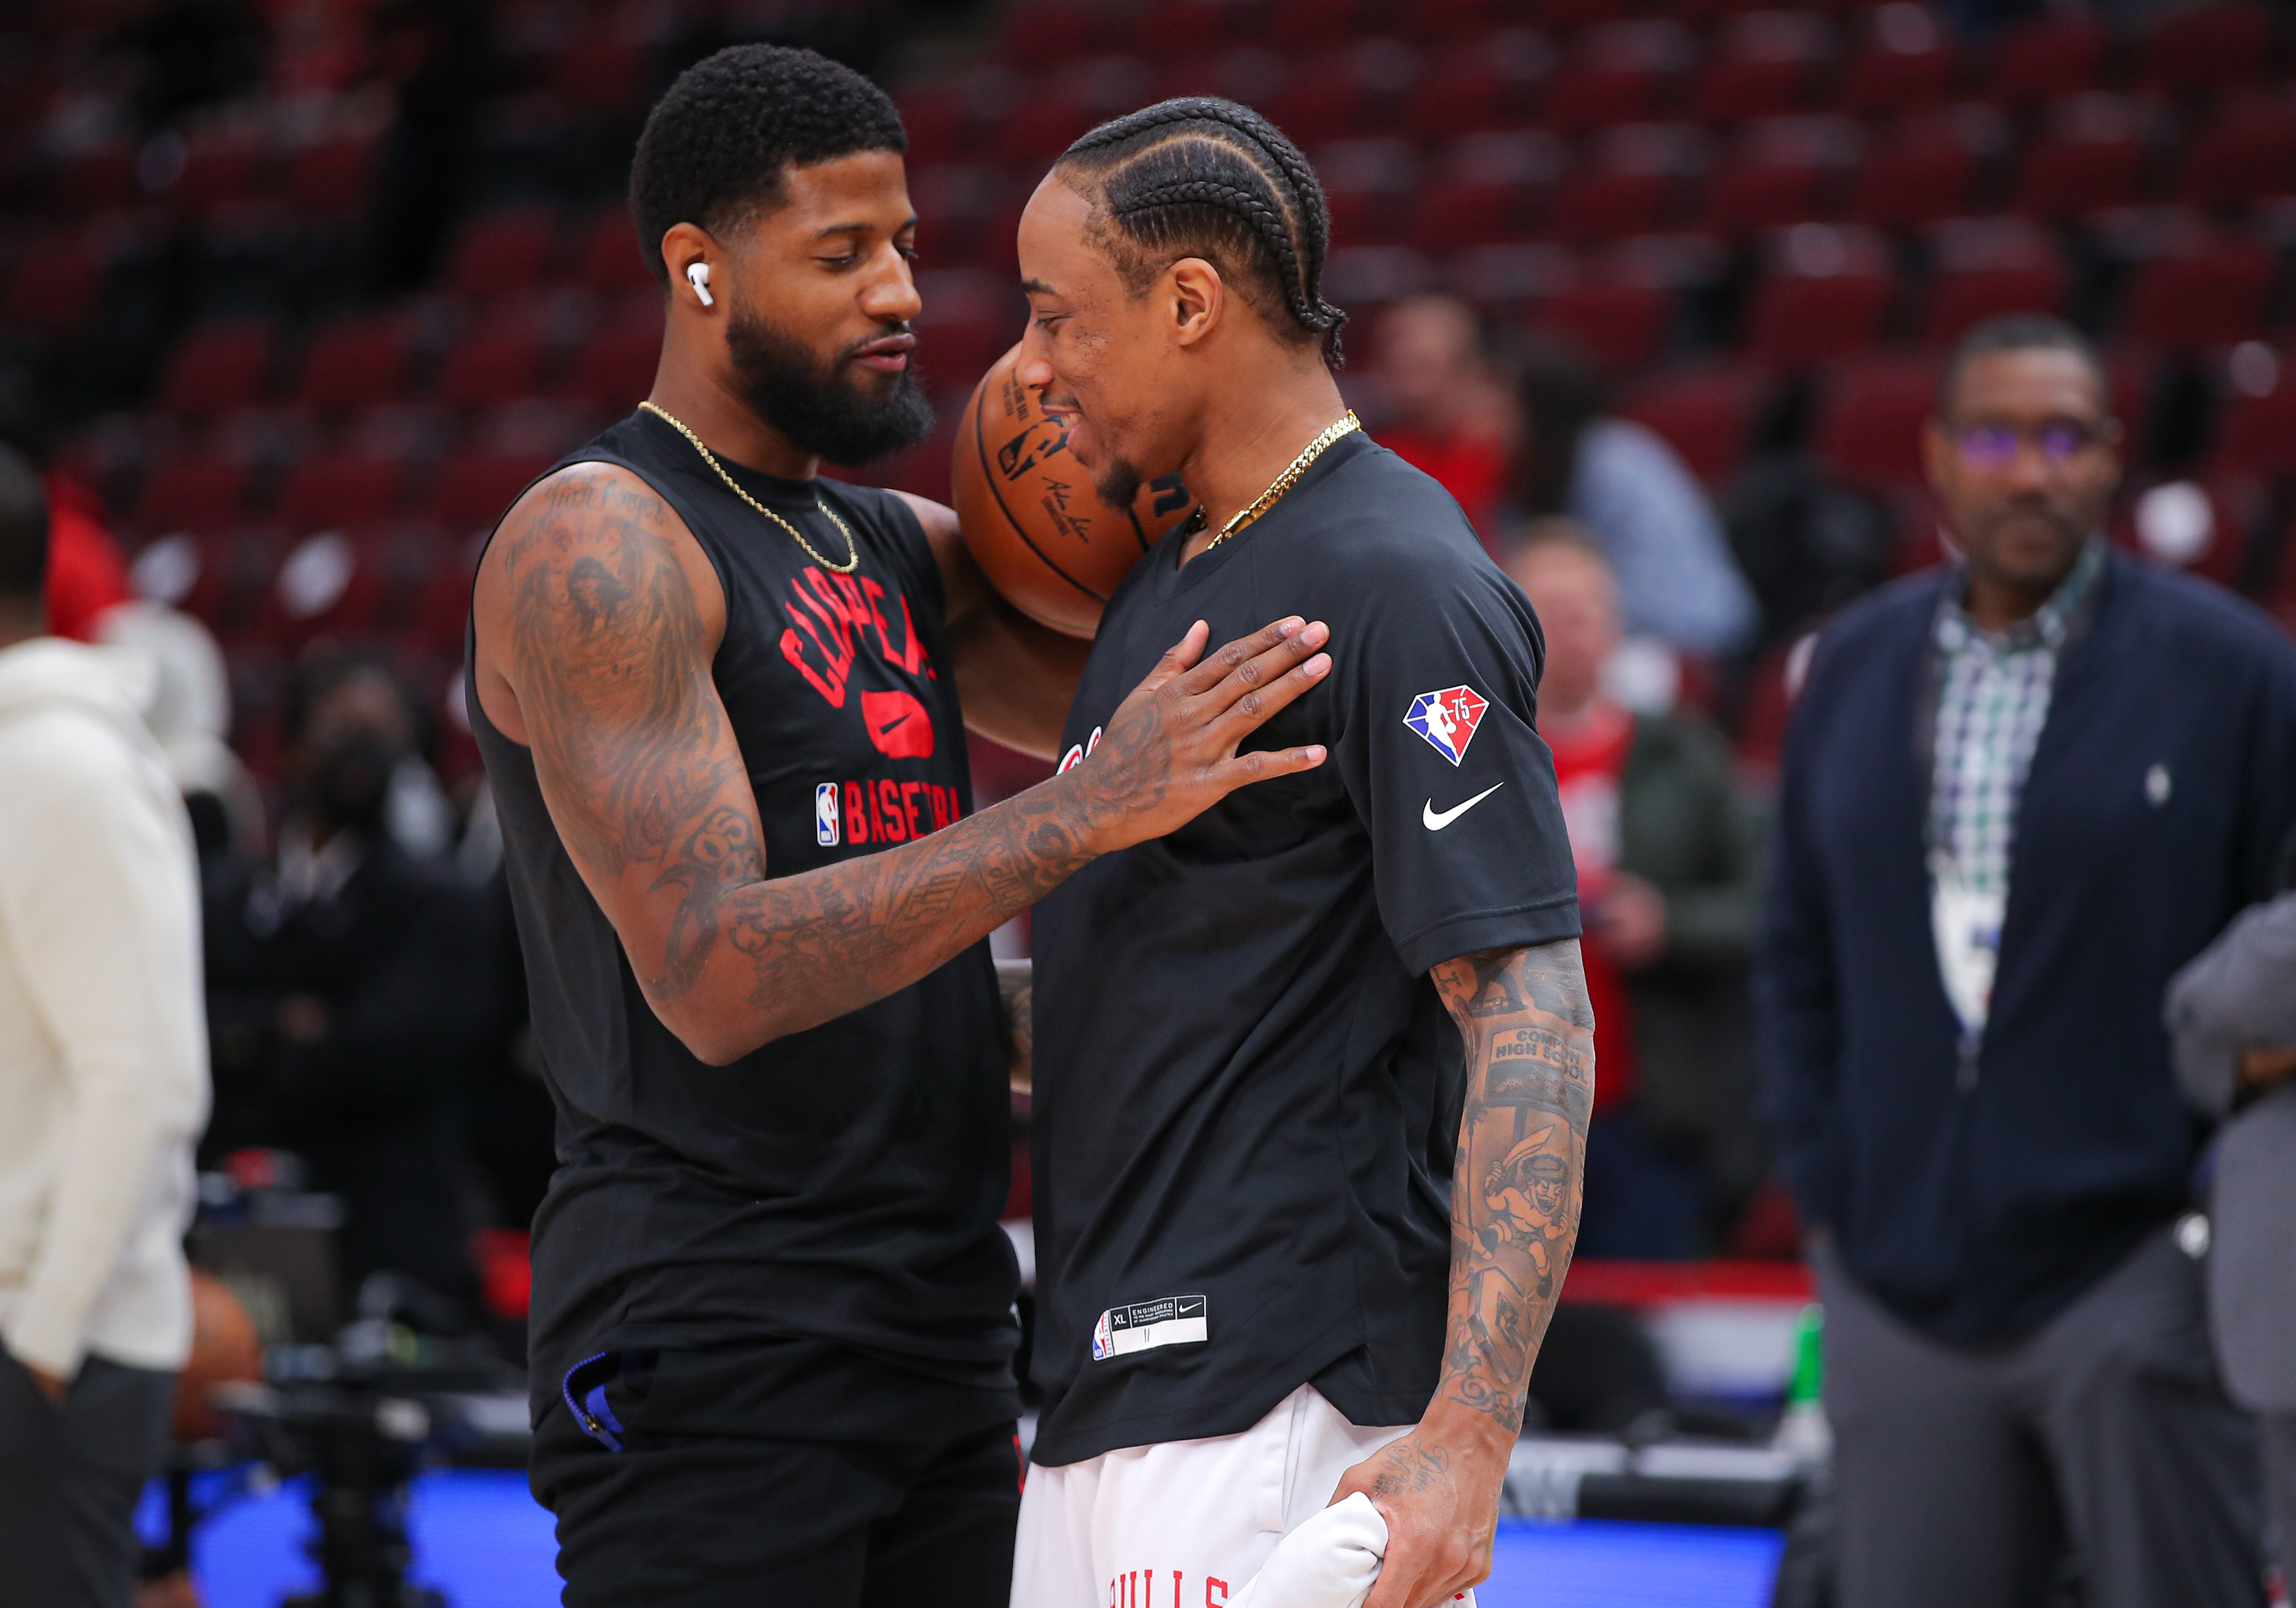 It's a good 75 to 100, stinks- DeMar DeRozan and Paul George agree with  LeBron James saying Bronny is better than many players